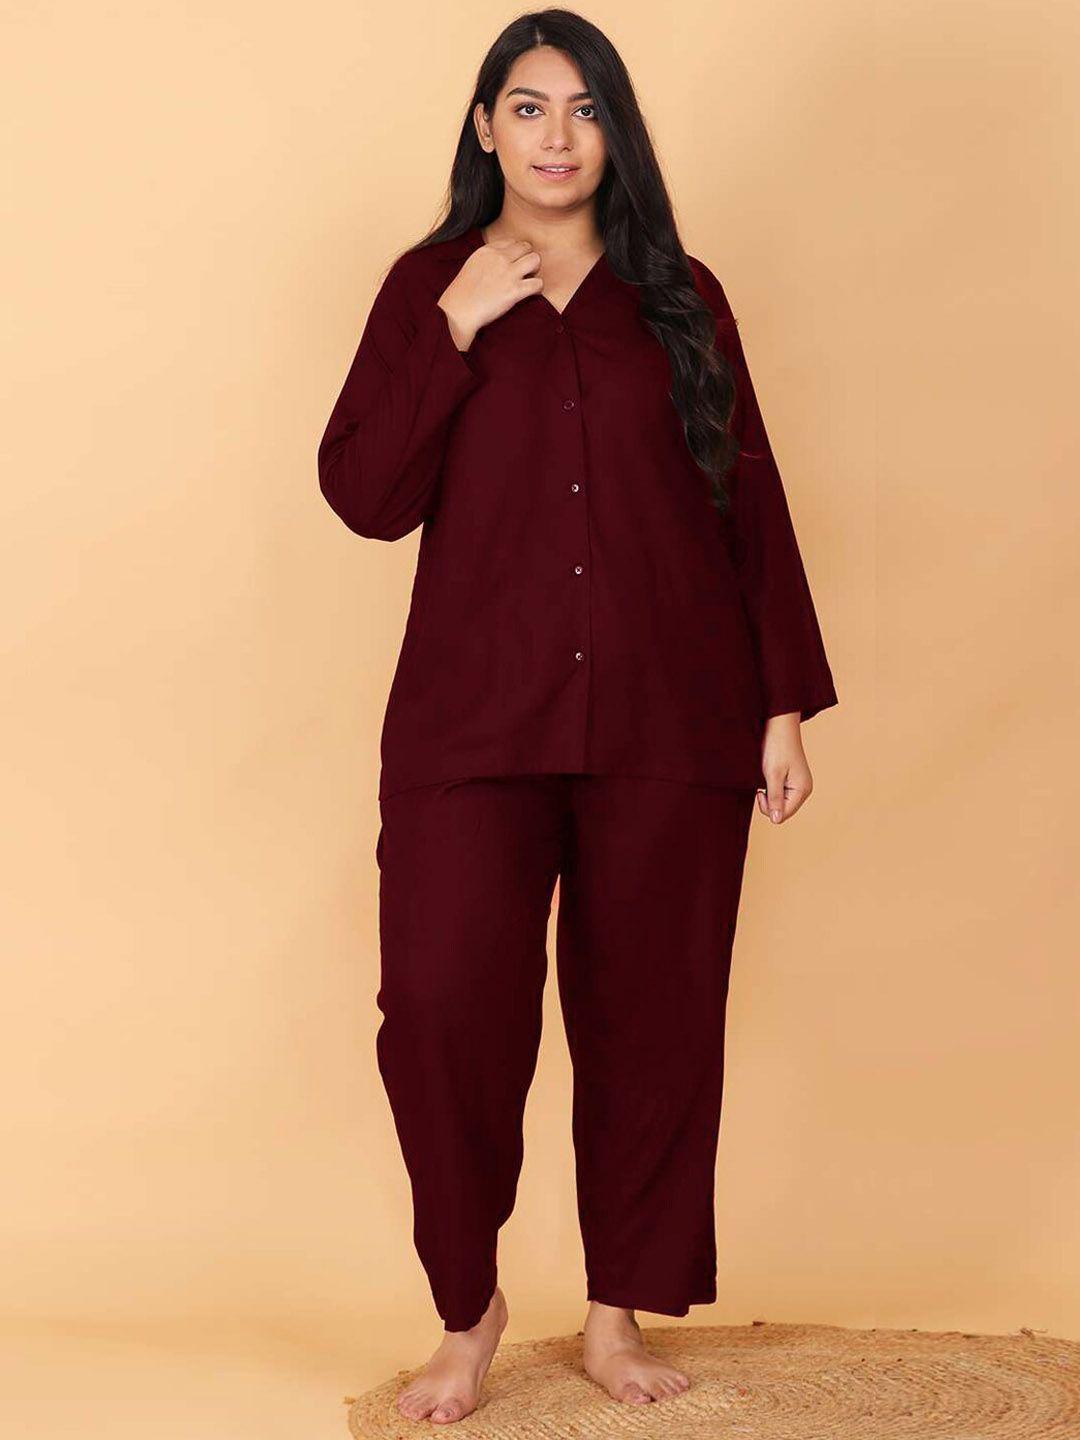 lastinch embroidered night suit